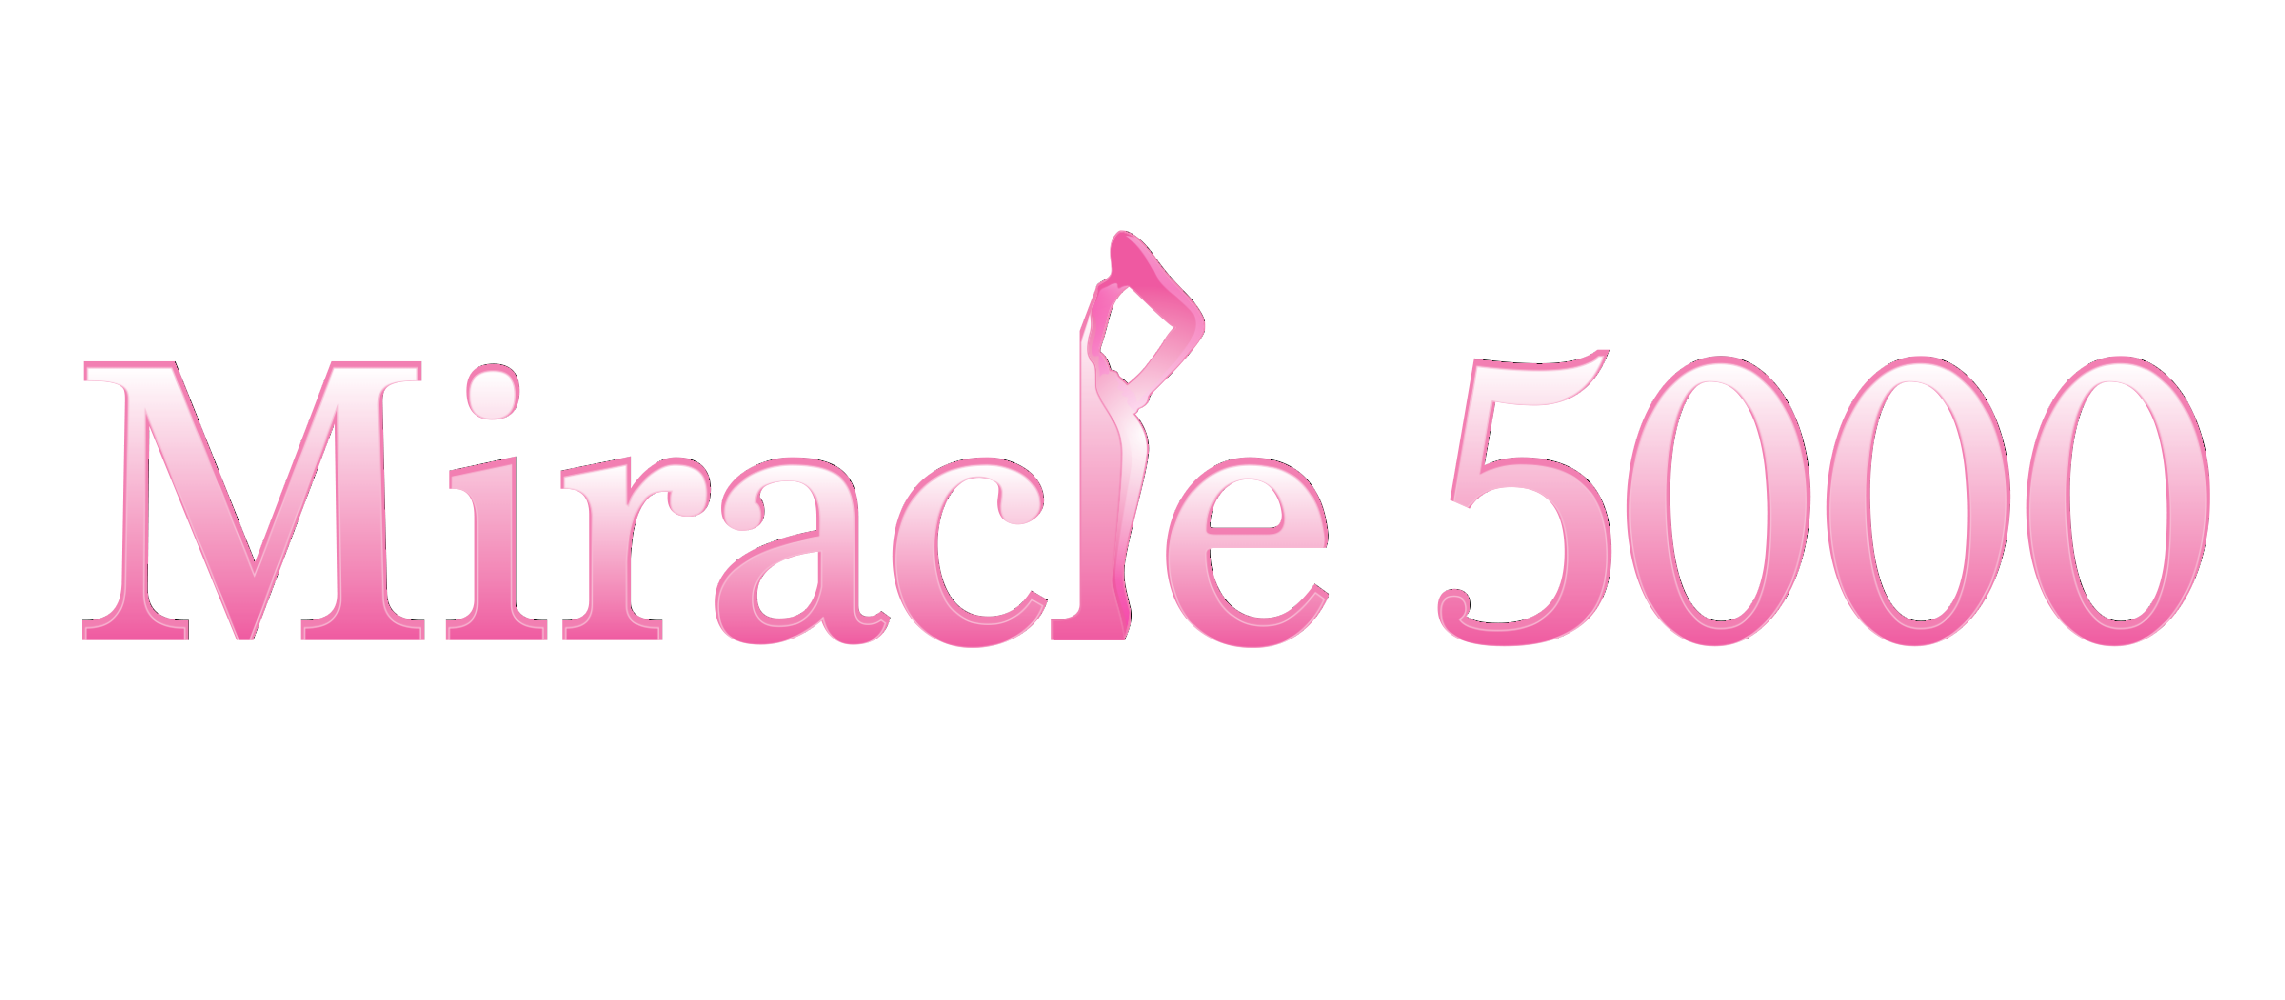 Miracle 5000, a new beauty invention that revolutionizes how people deal with unwanted cellulite.